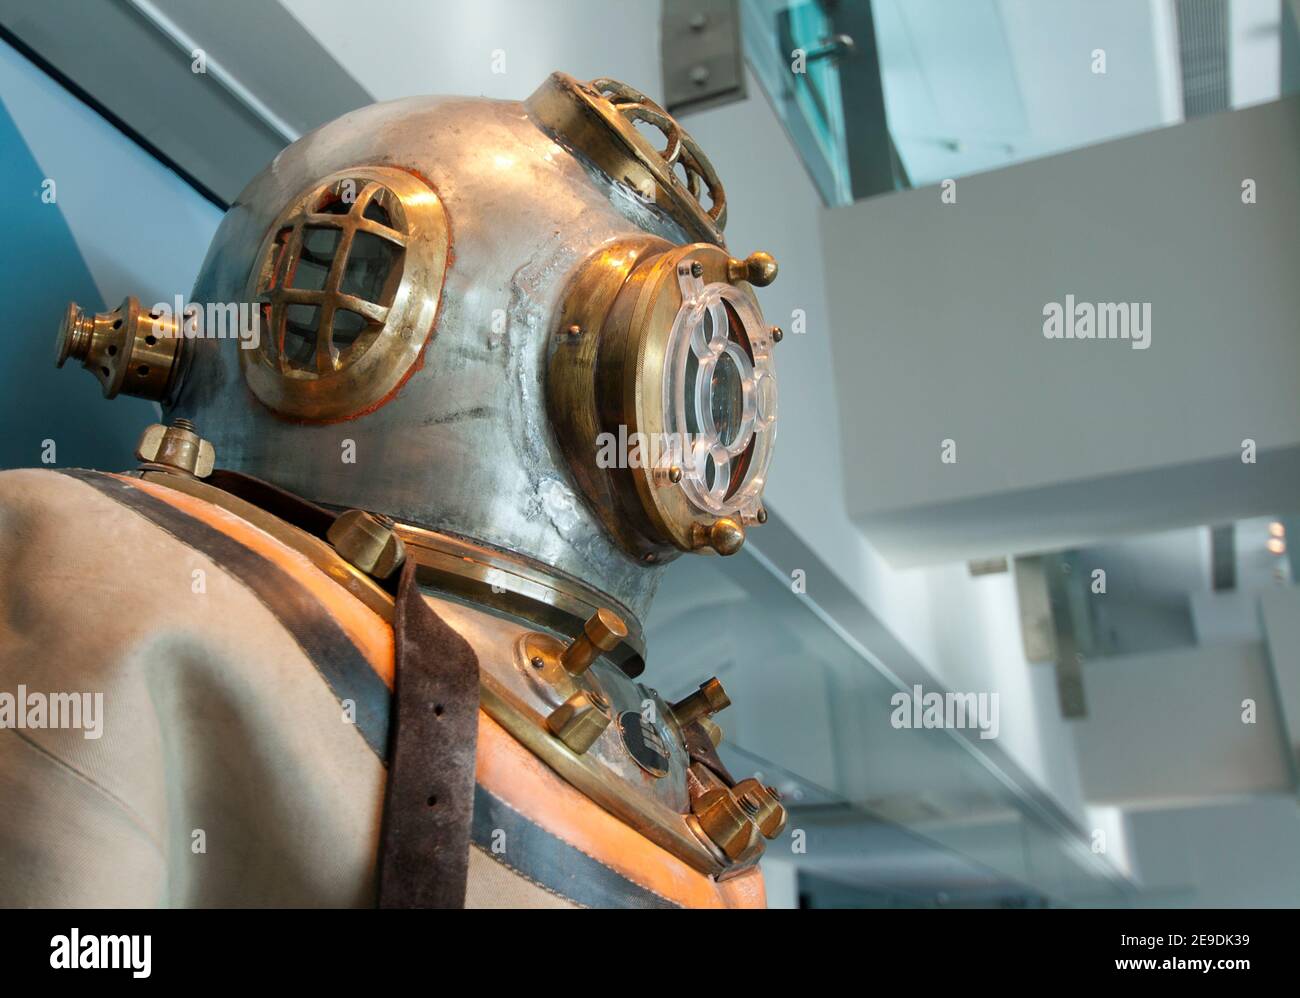 Retro diving suit with steel and copper dive helmet Stock Photo